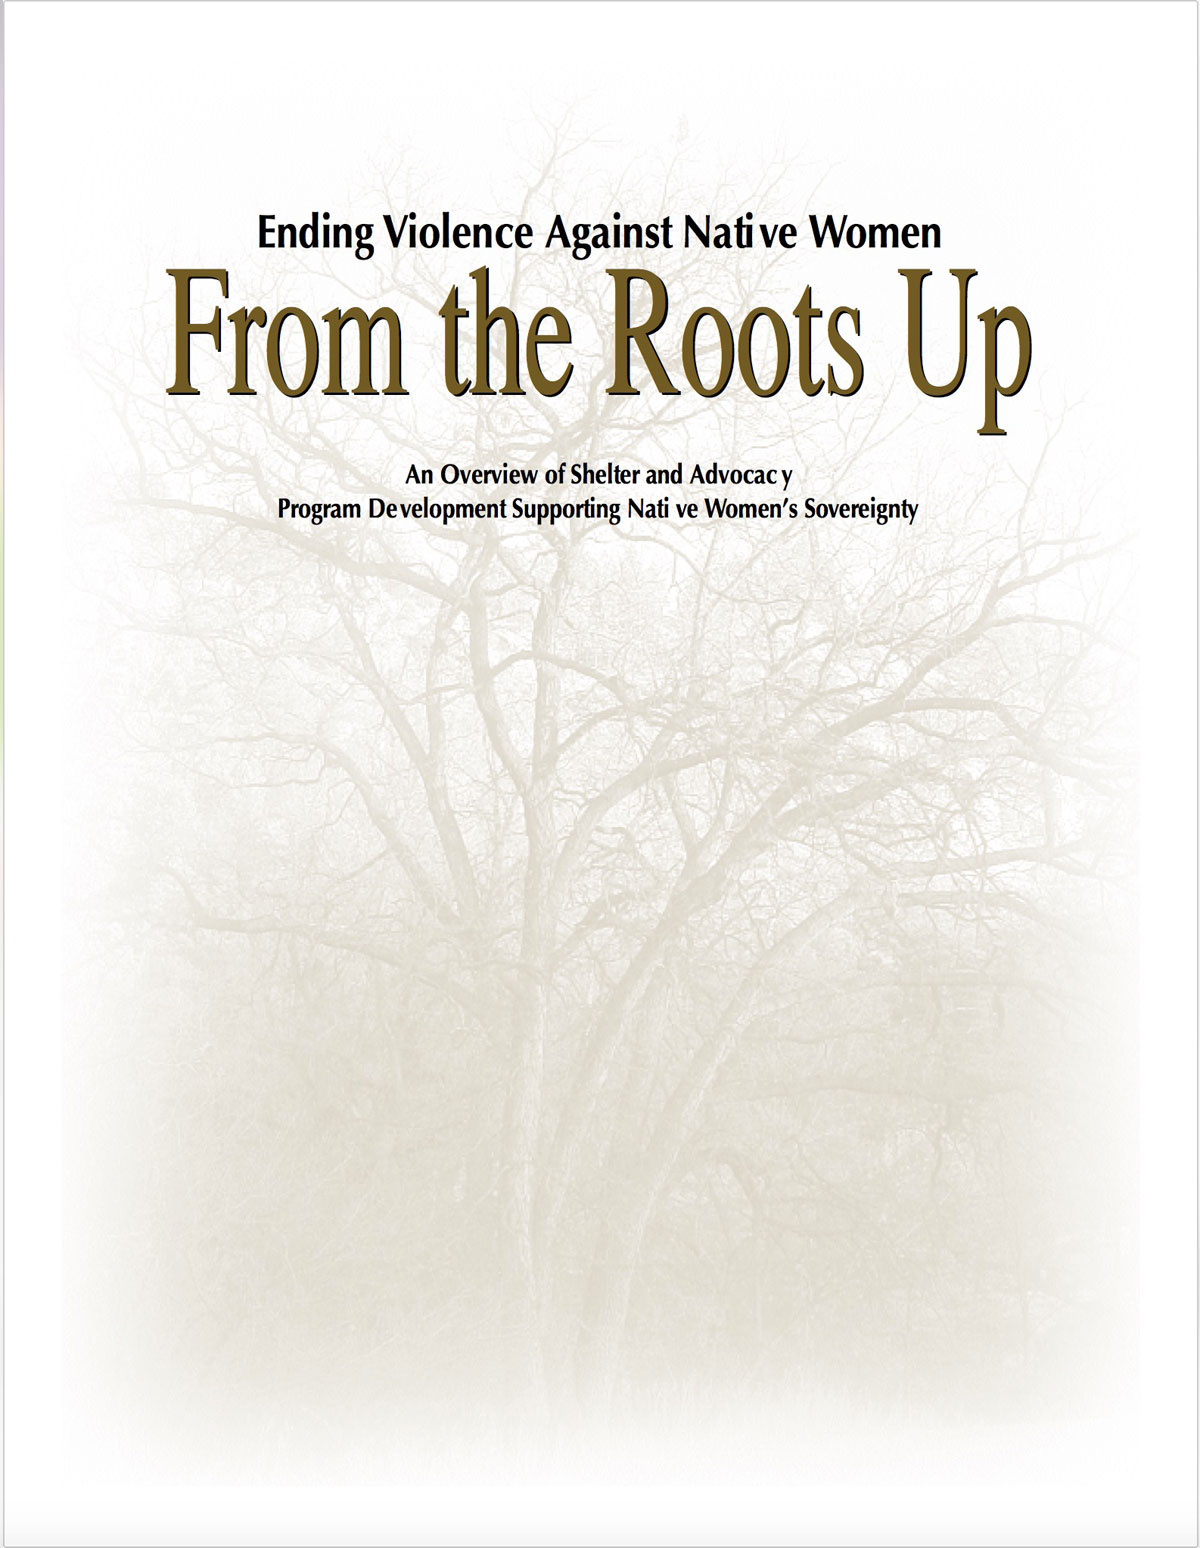 From The Roots Up: An Overview of Shelter and Advocacy Program Development Supporting Women’s Sovereignty